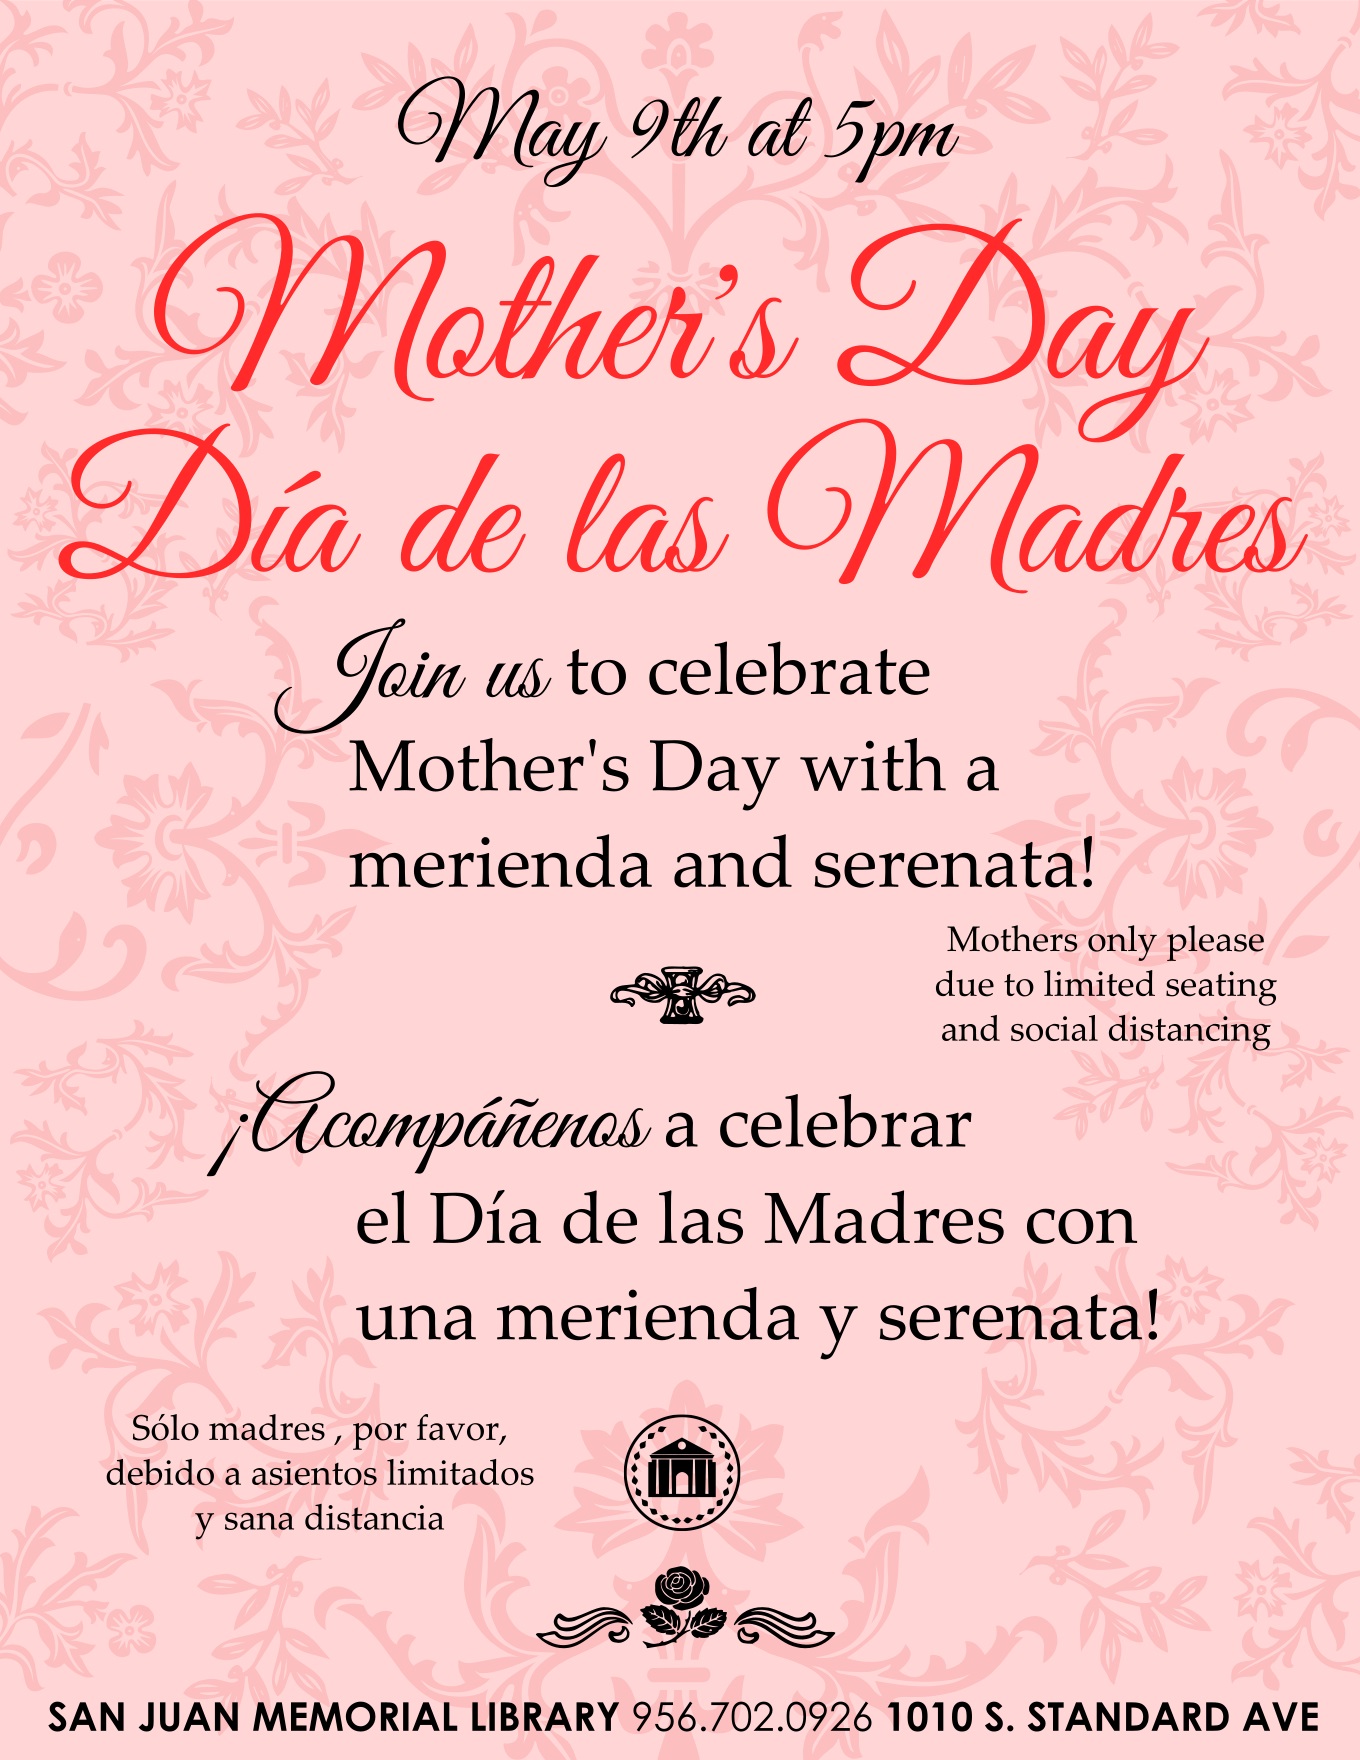 Mother’s Day Event